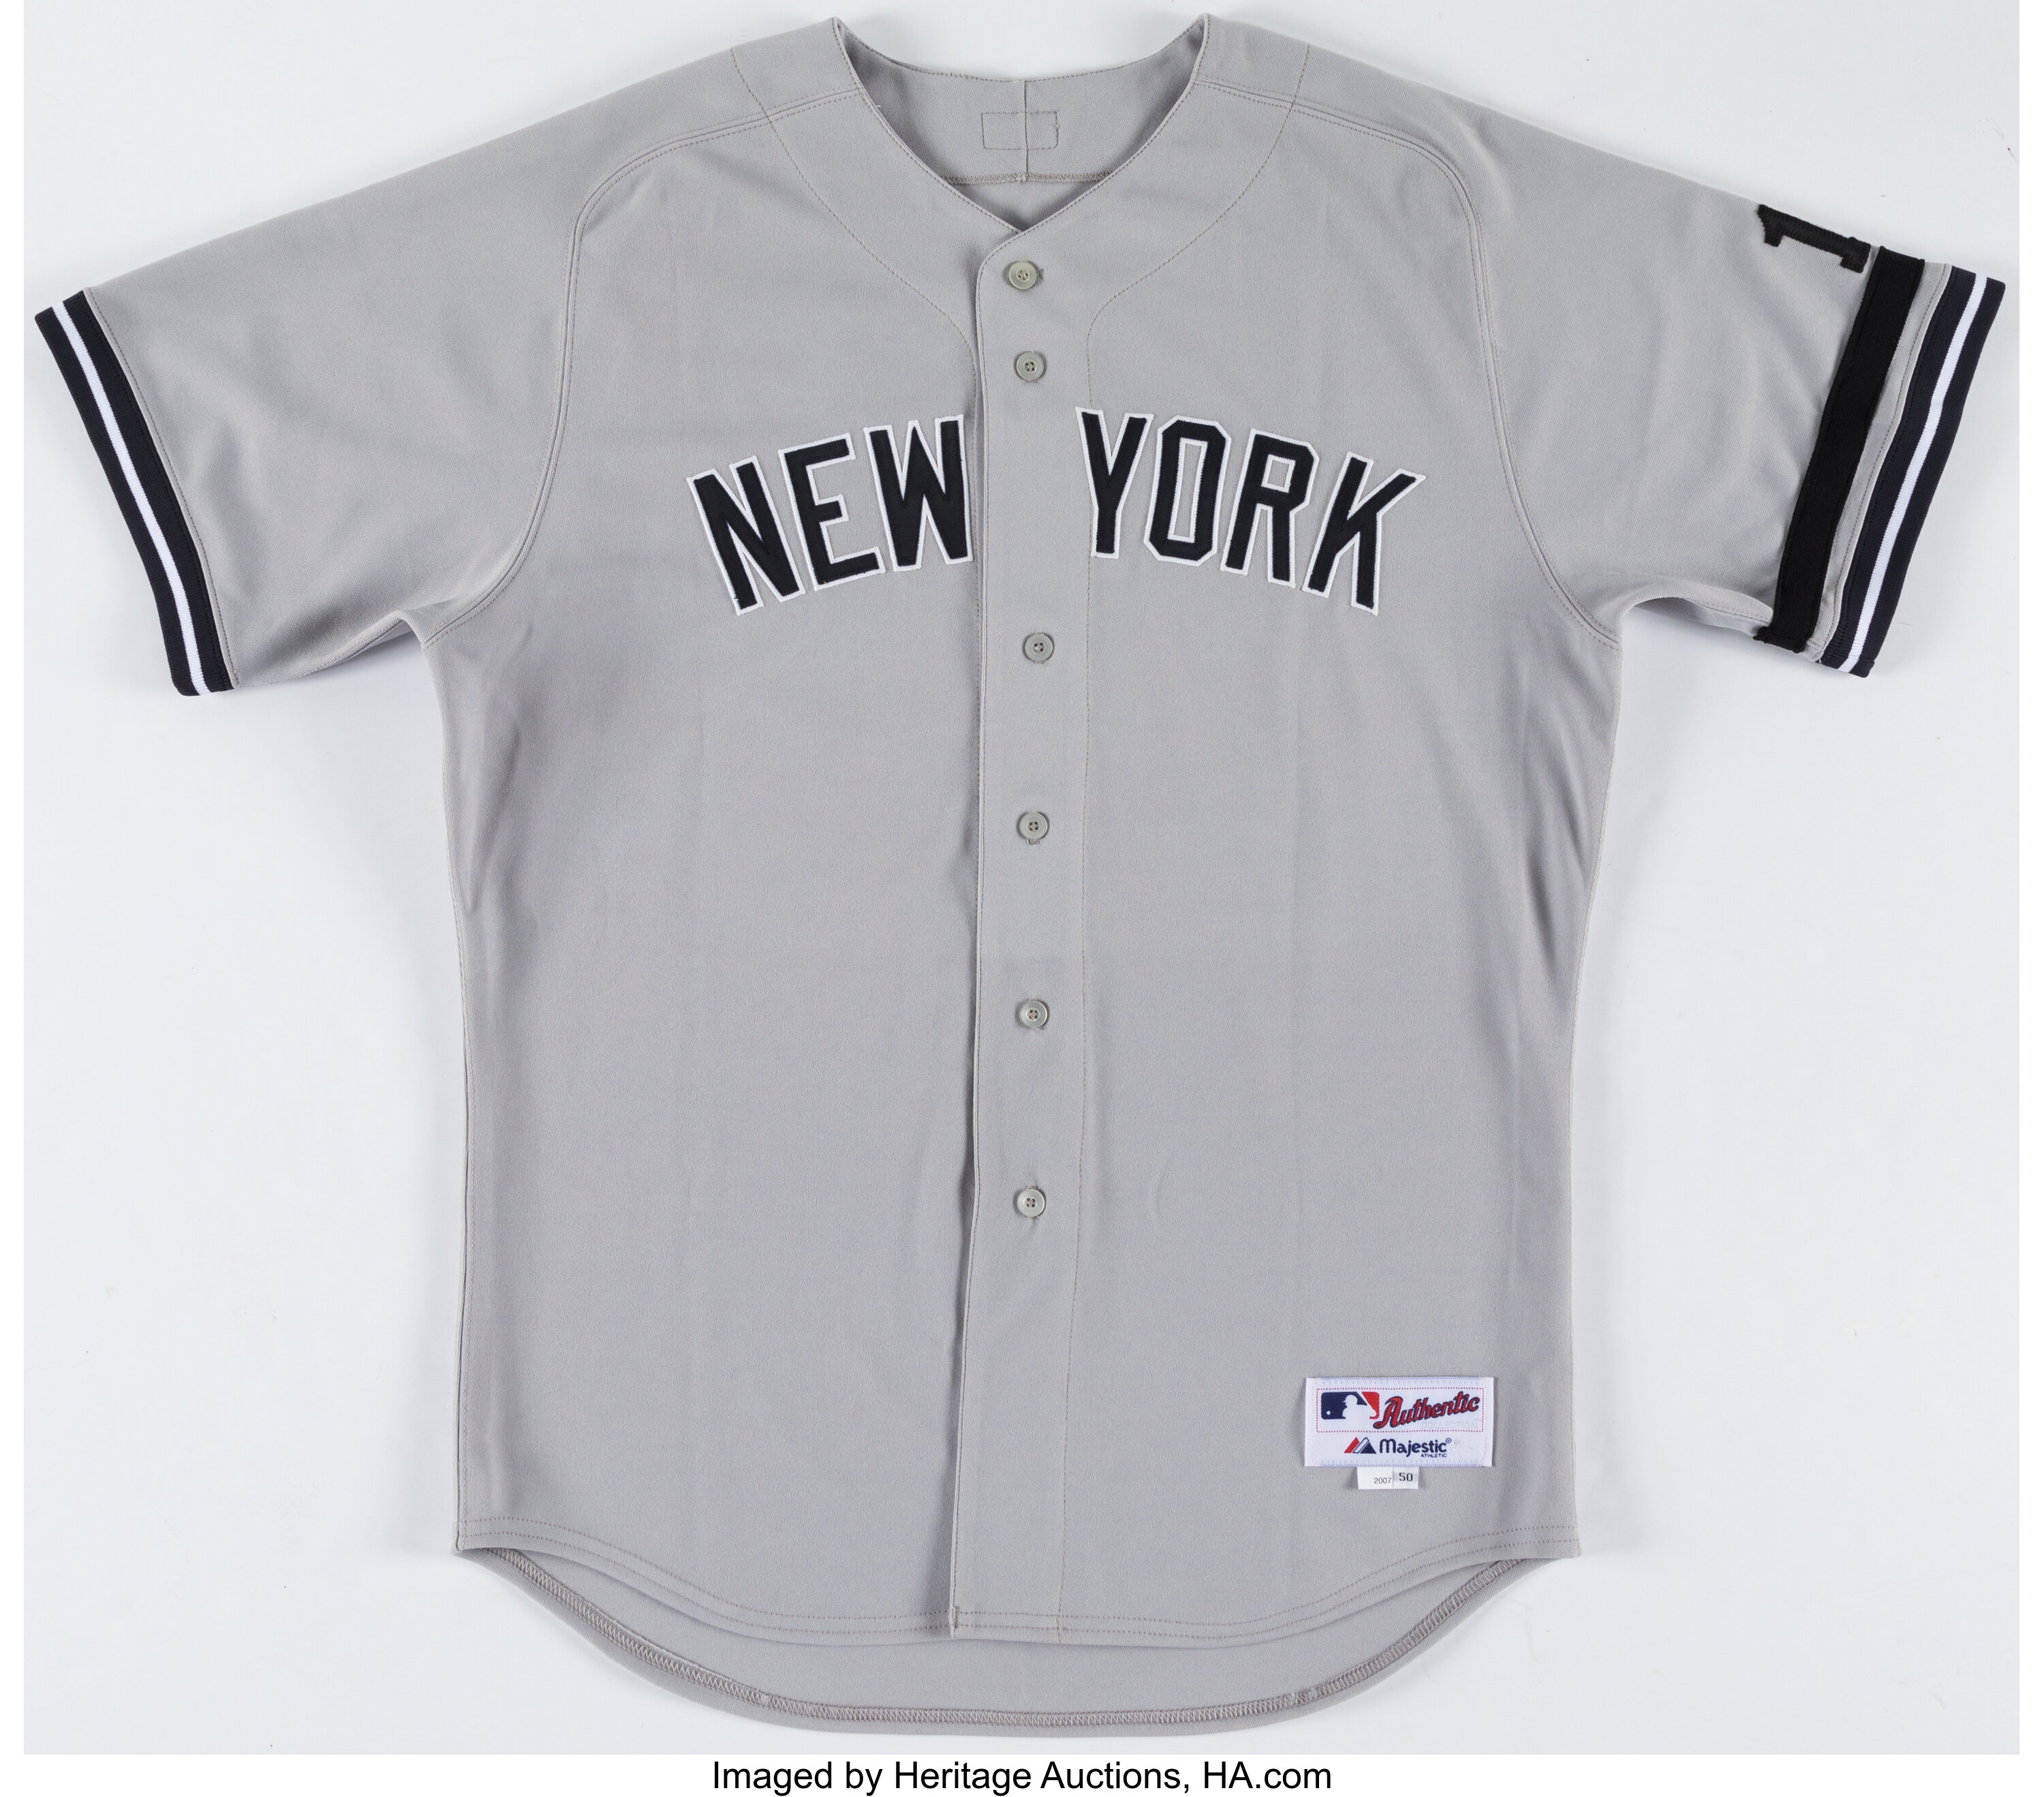 2007 Andy Pettitte Team Issued New York Yankees Jersey